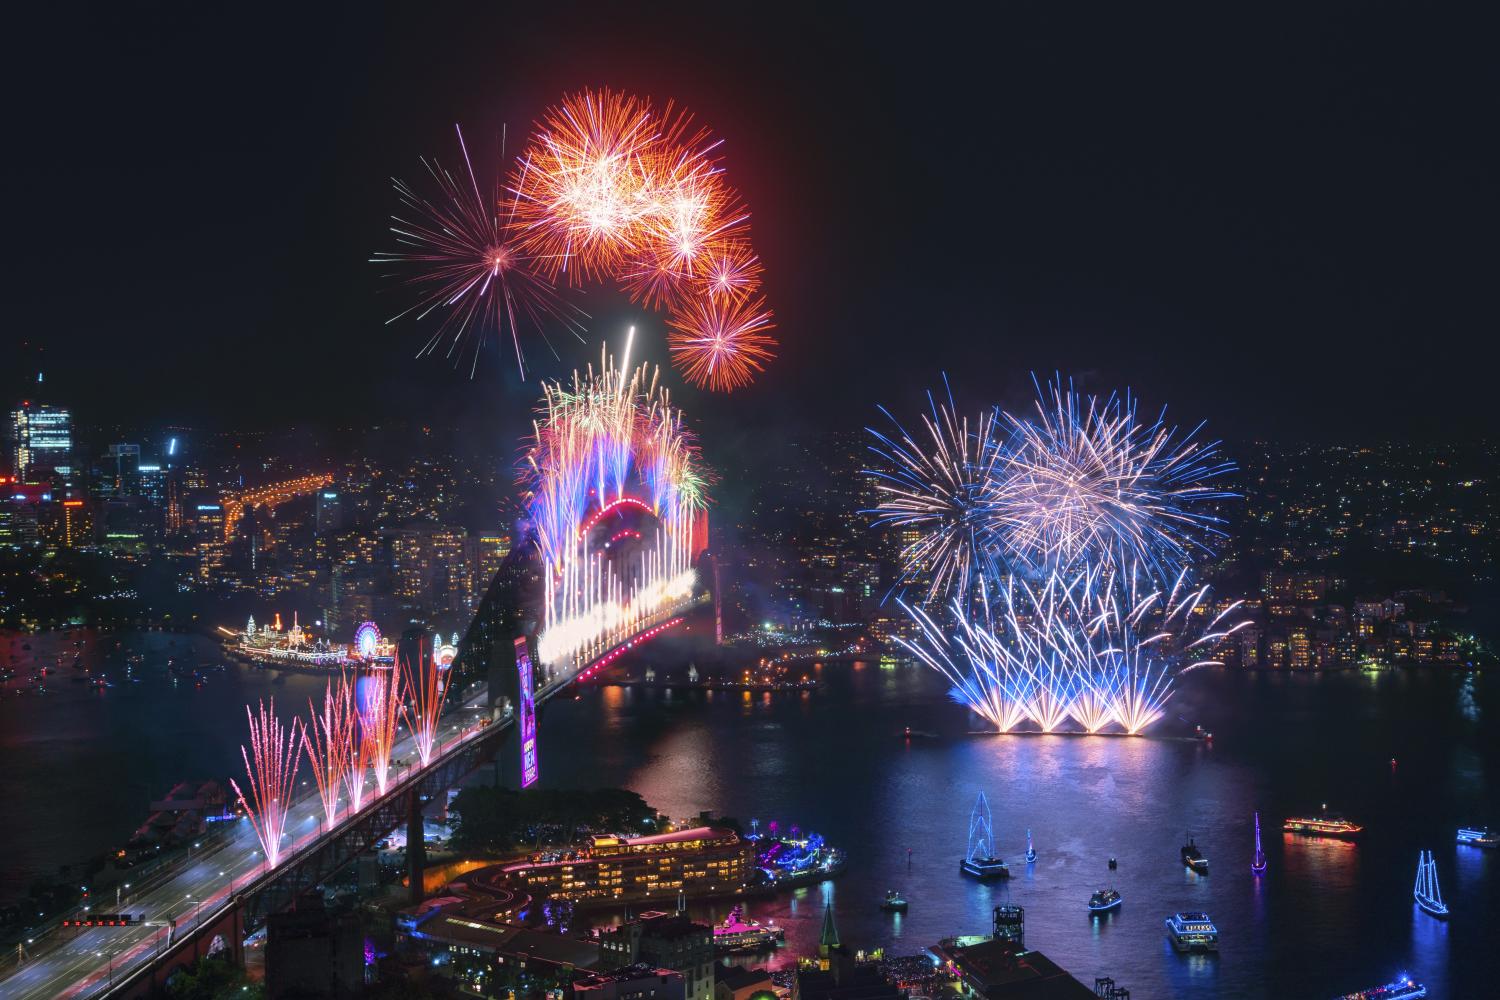 Spectacular midnight fireworks display across Sydney Harbour at to celebrate the start of the new year 2020